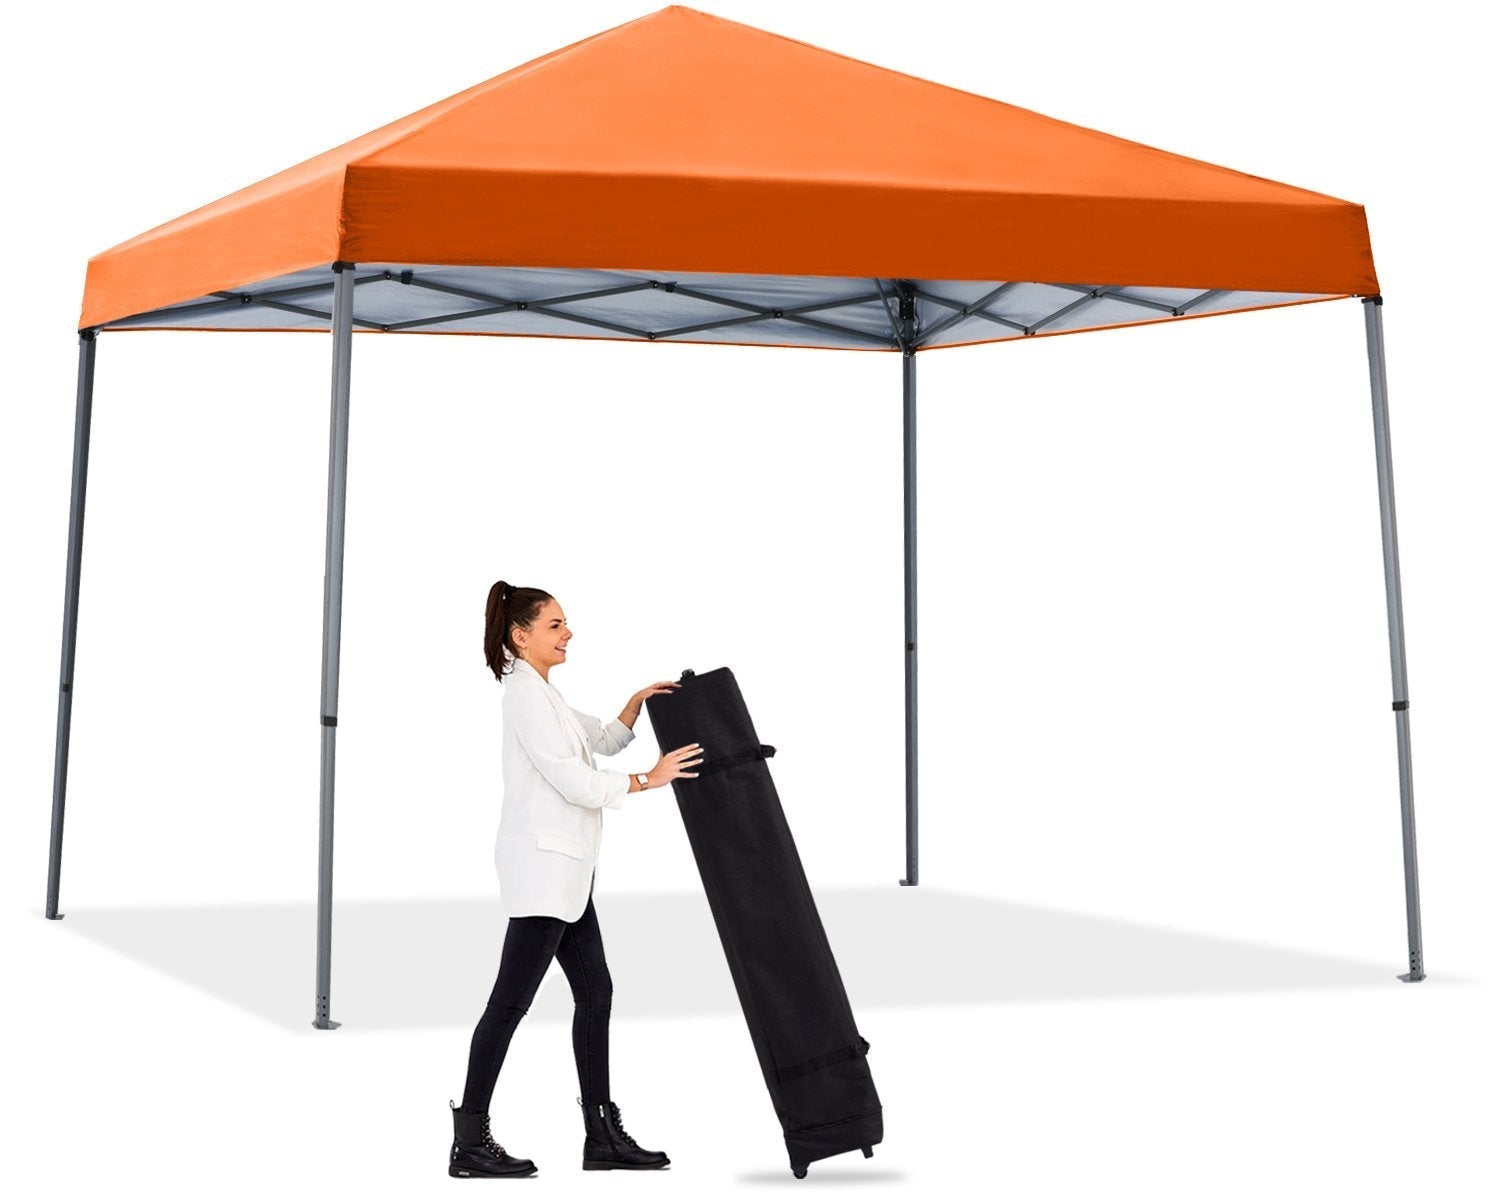 Stable Pop up Outdoor Canopy Tent - ABC-CANOPY